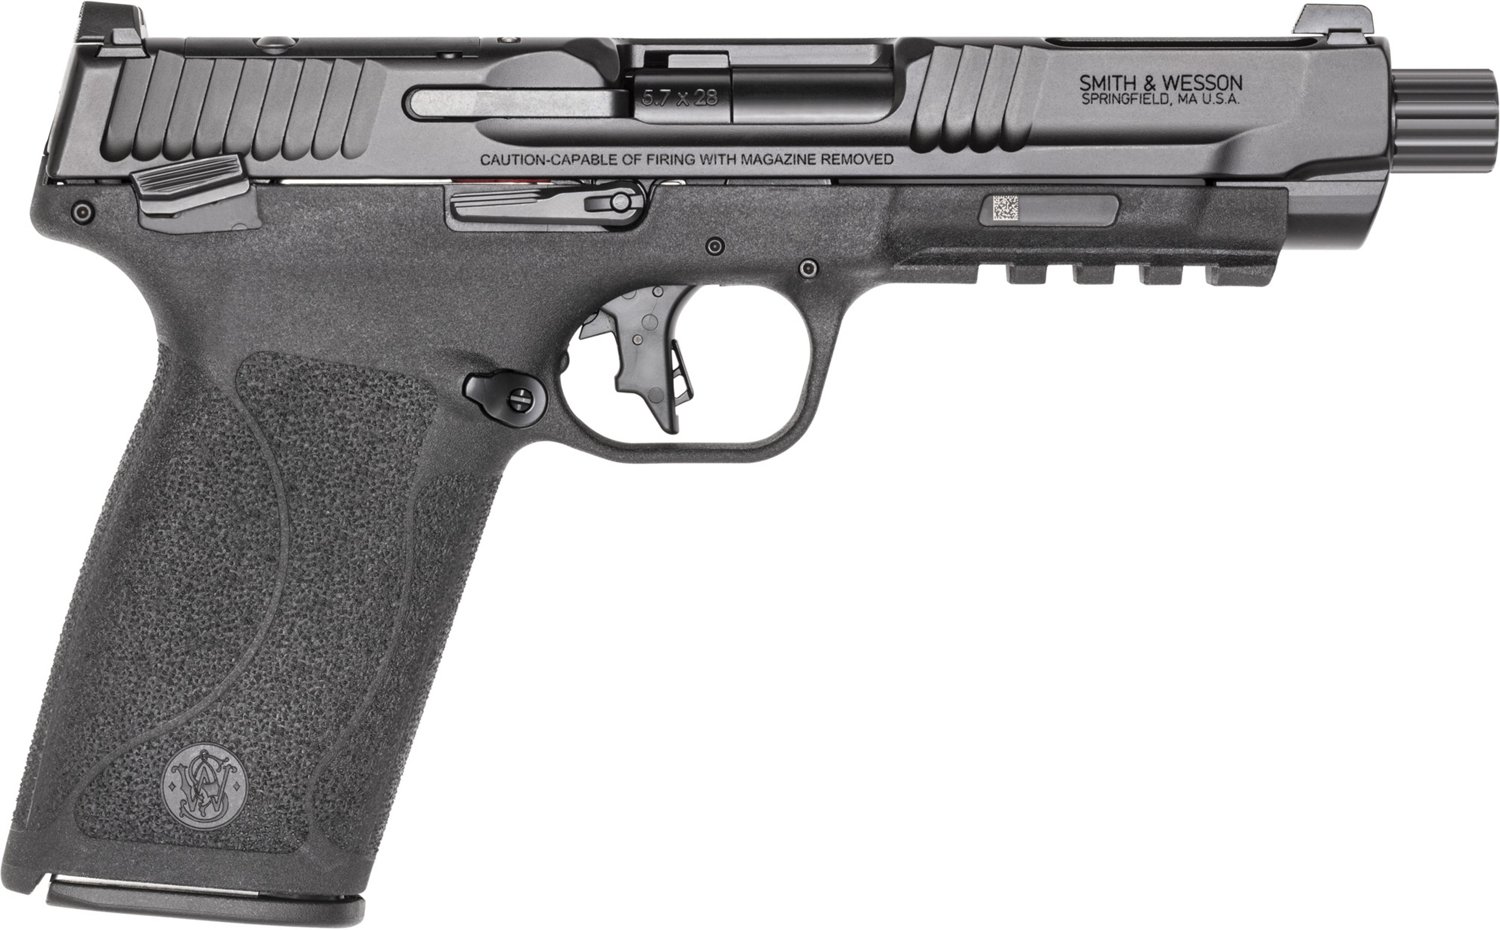 Smith & Wesson M&P 5.7x28mm Pistol                                                                                               - view number 1 selected